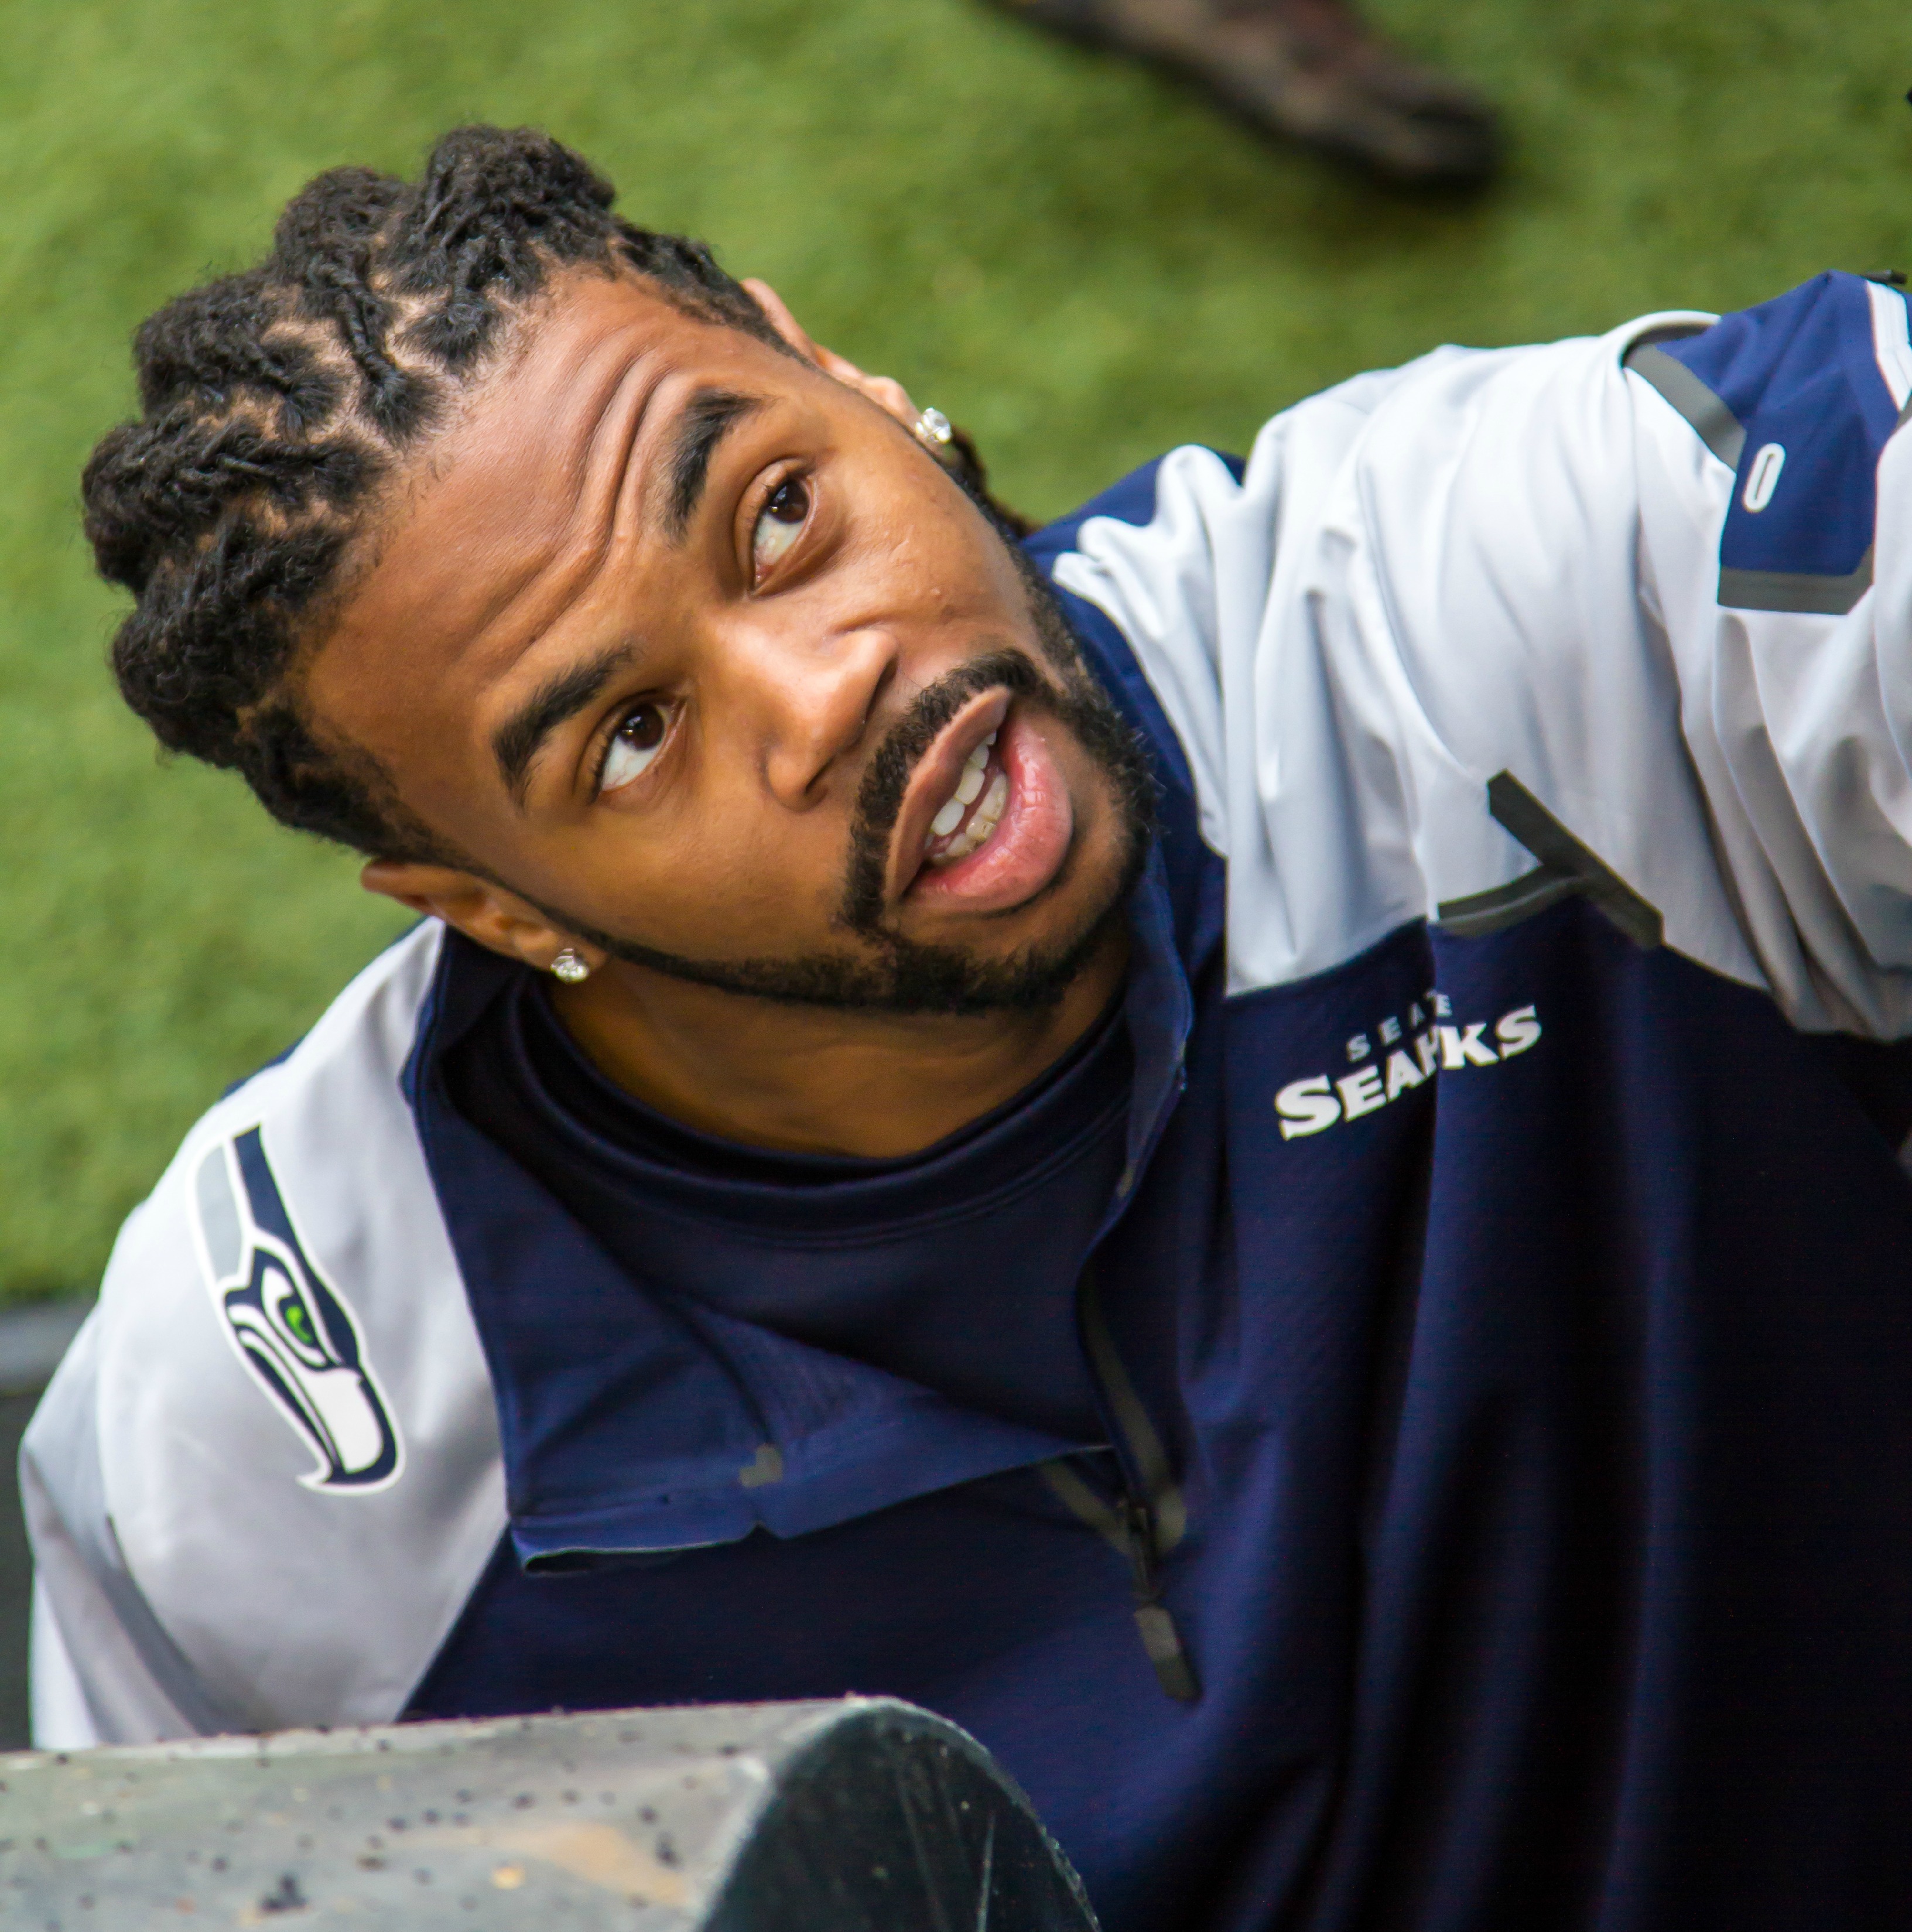 Earlier this offseason the Seahawks resigned wide receiver Sidney Rice in hopes